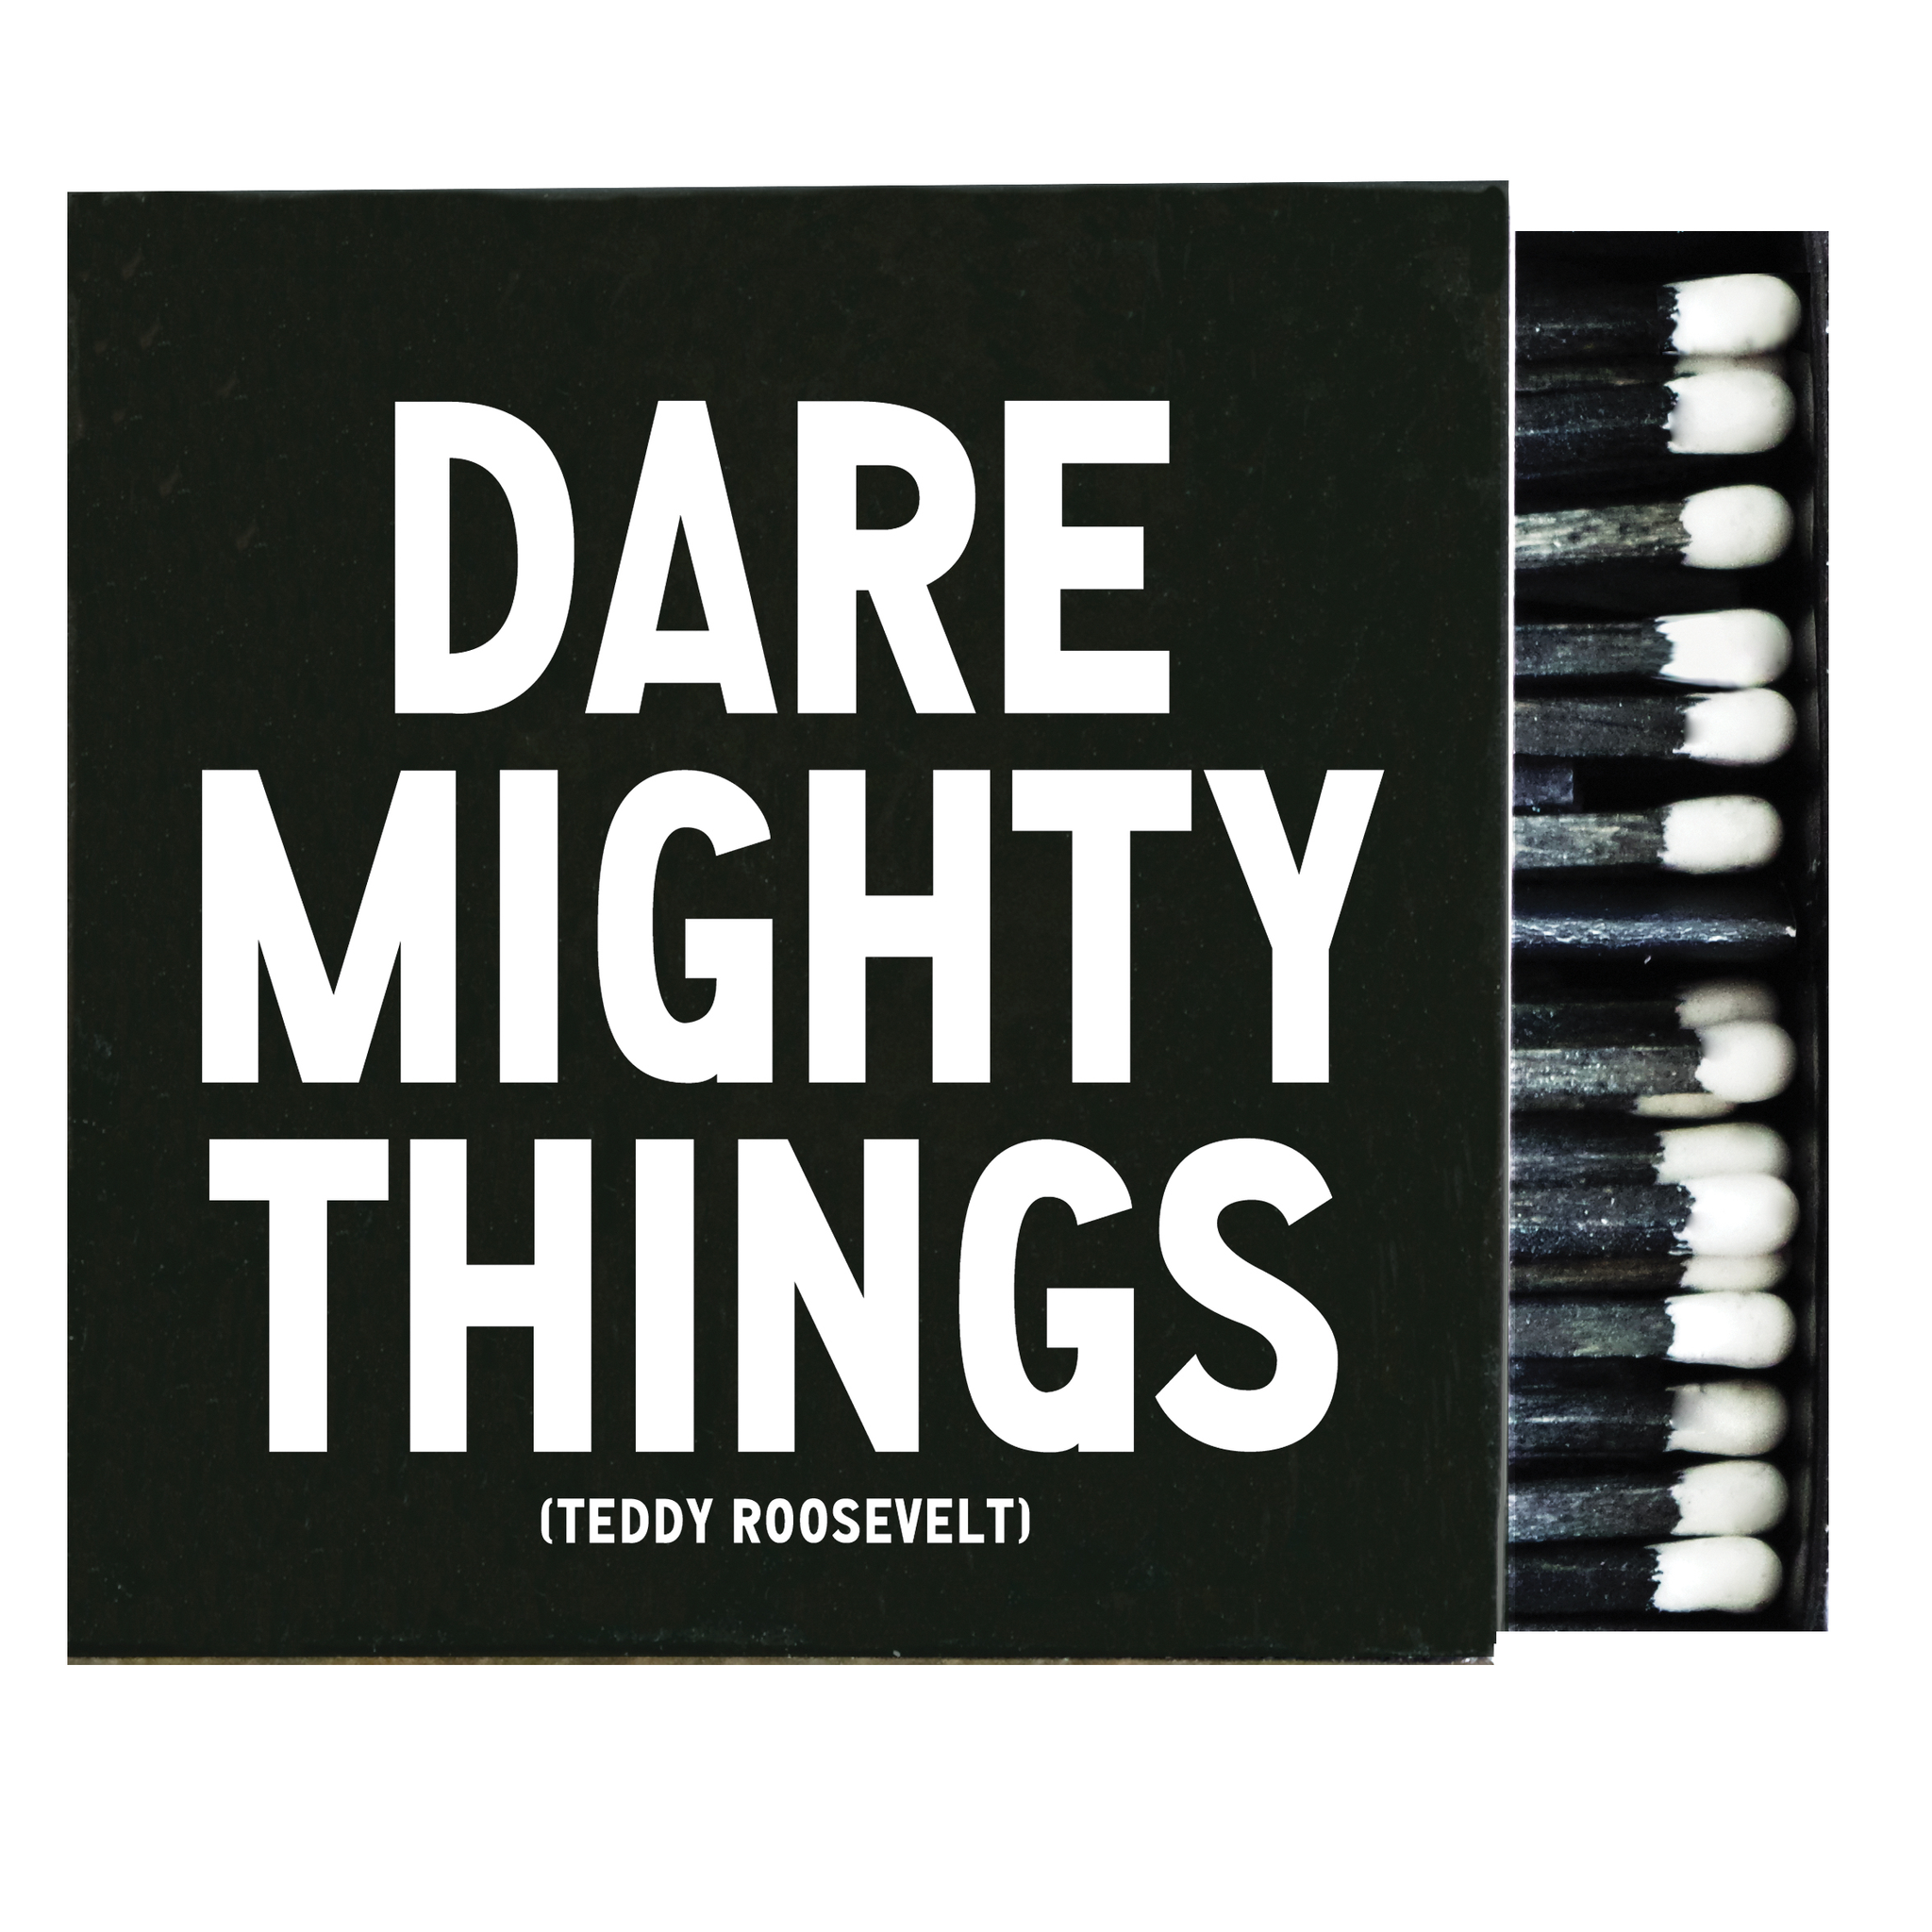 Matchboxes - X122 - Dare Mighty Things (Teddy Roosevelt)